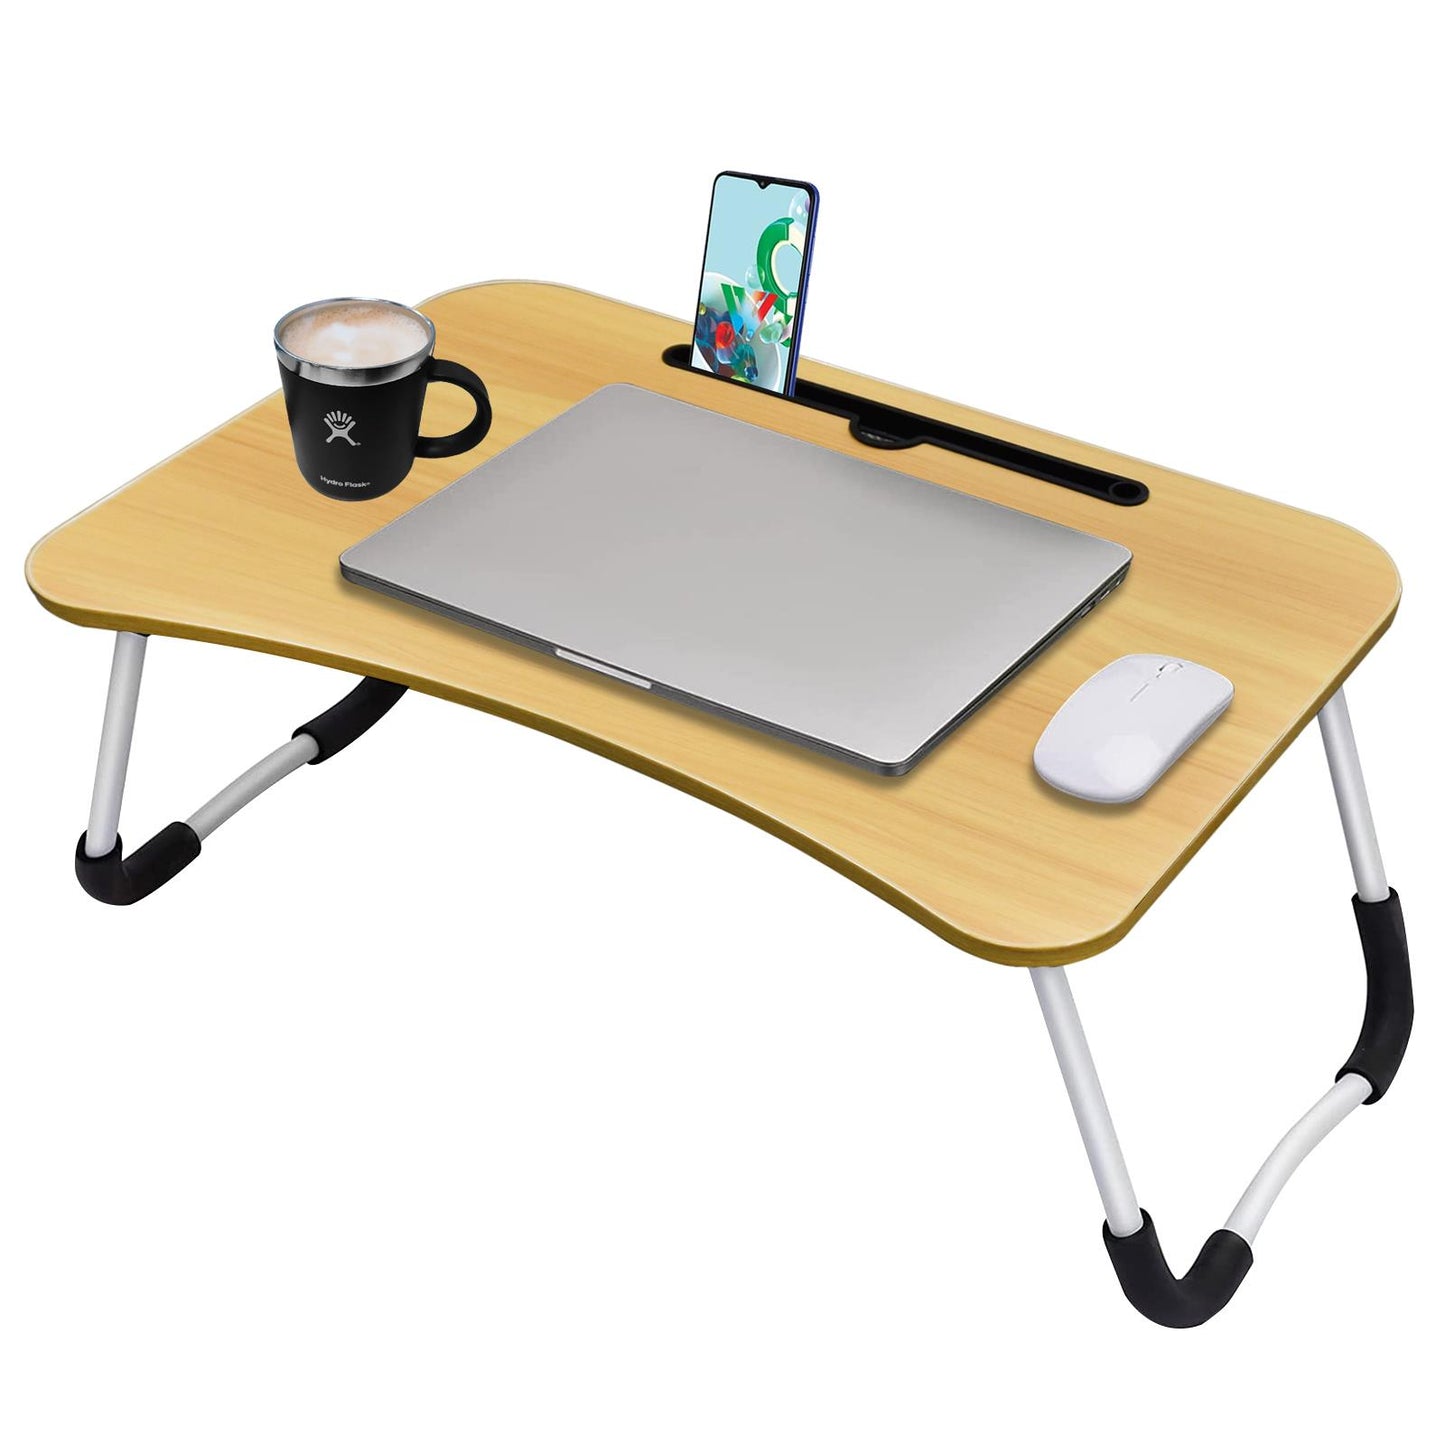 Portable And Adjustable Tray For Breakfast In Bed Or Working On Laptop